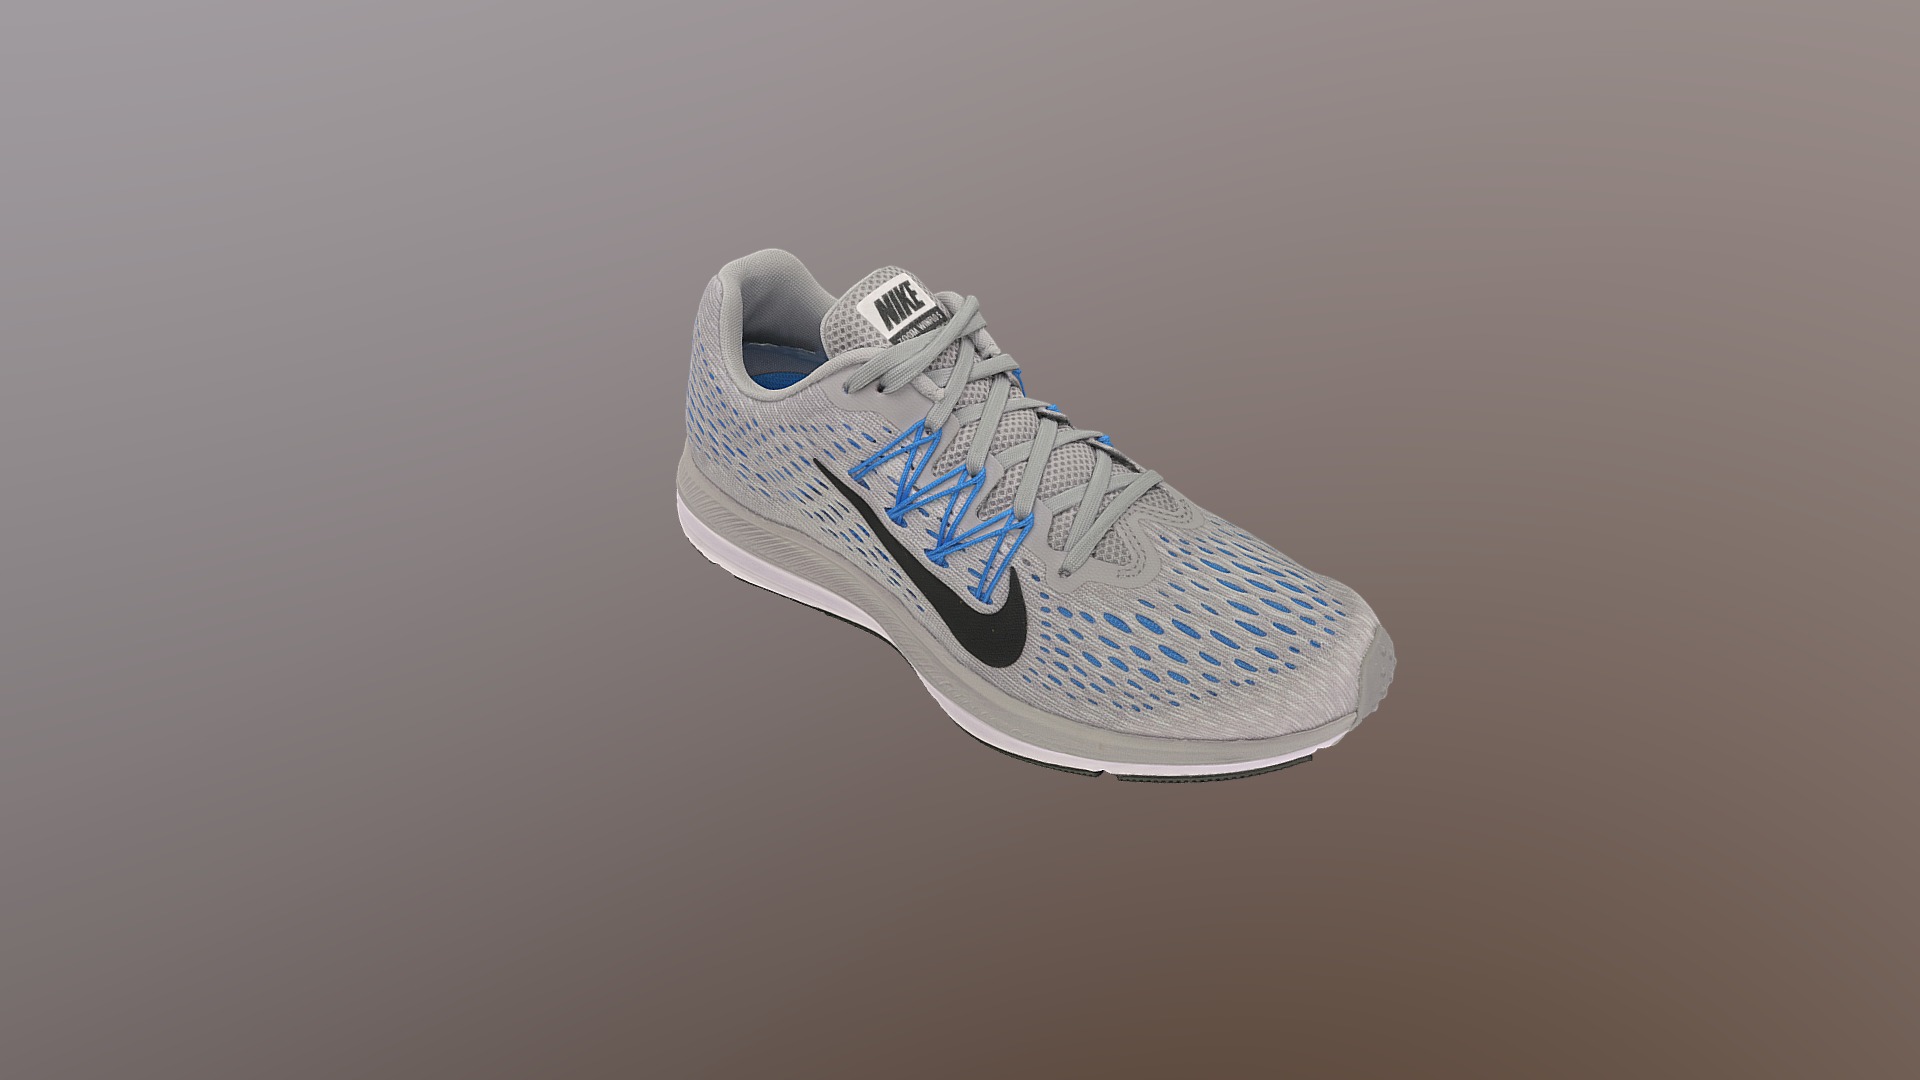 3D model Nike Zoom Winflo 5 Sport Shoe - This is a 3D model of the Nike Zoom Winflo 5 Sport Shoe. The 3D model is about a white and blue shoe.